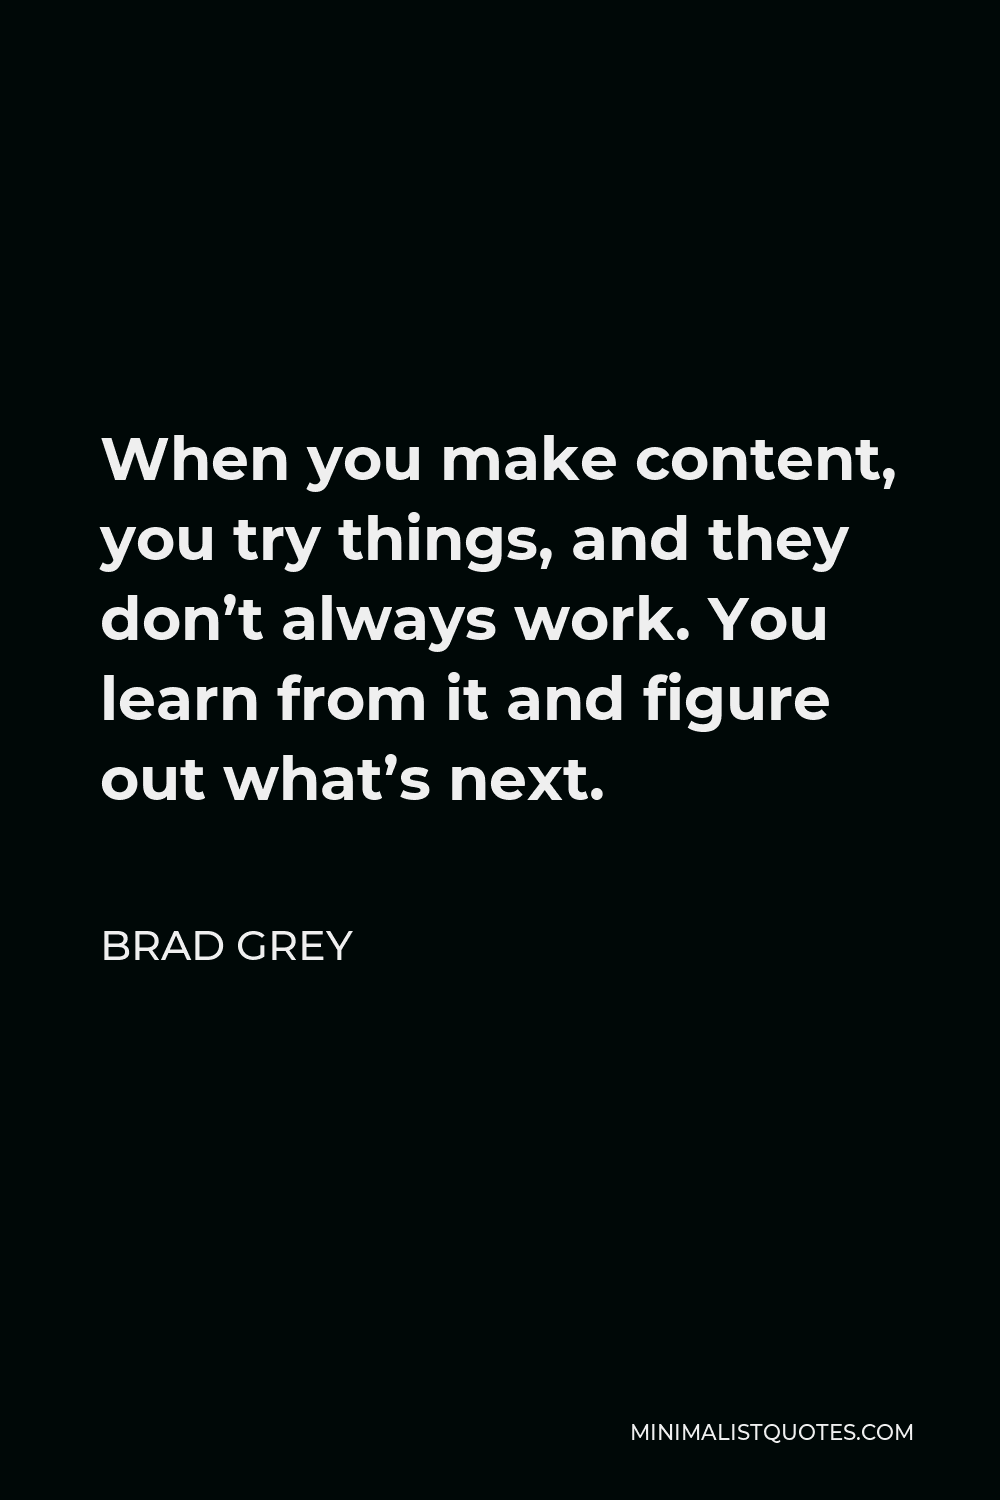 Brad Grey Quote - When you make content, you try things, and they don’t always work. You learn from it and figure out what’s next.